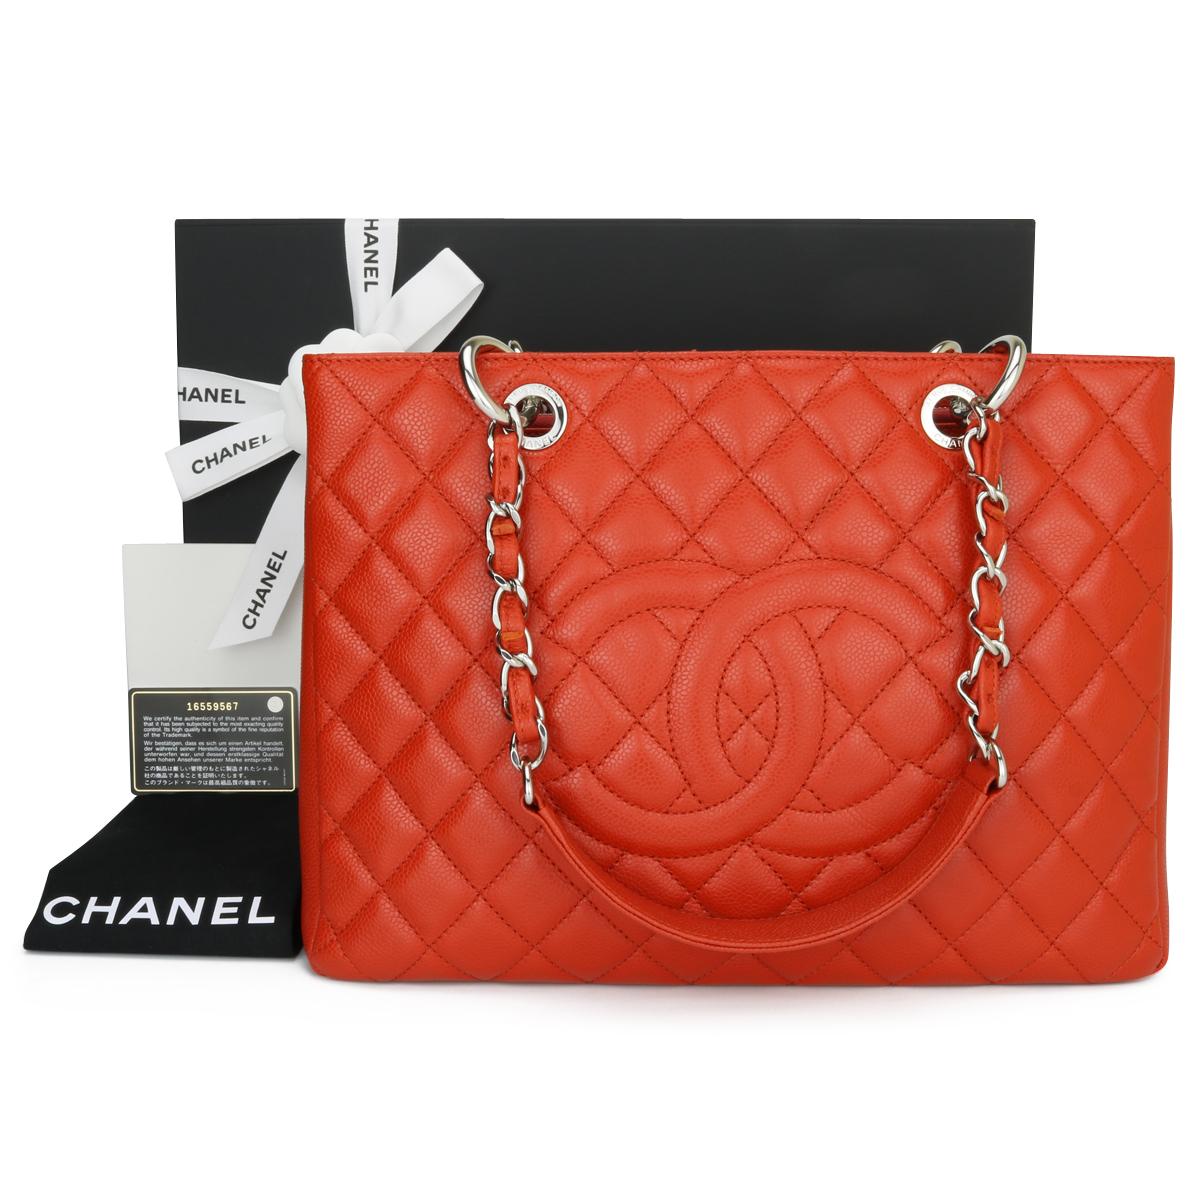 CHANEL Grand Shopping Tote (GST) Orange Caviar with Silver Hardware 2012.

This bag is in pristine condition, the bag still holds its original shape, and the hardware is still very shiny.
As Chanel has discontinued the Grand Shopping Tote (GST), it